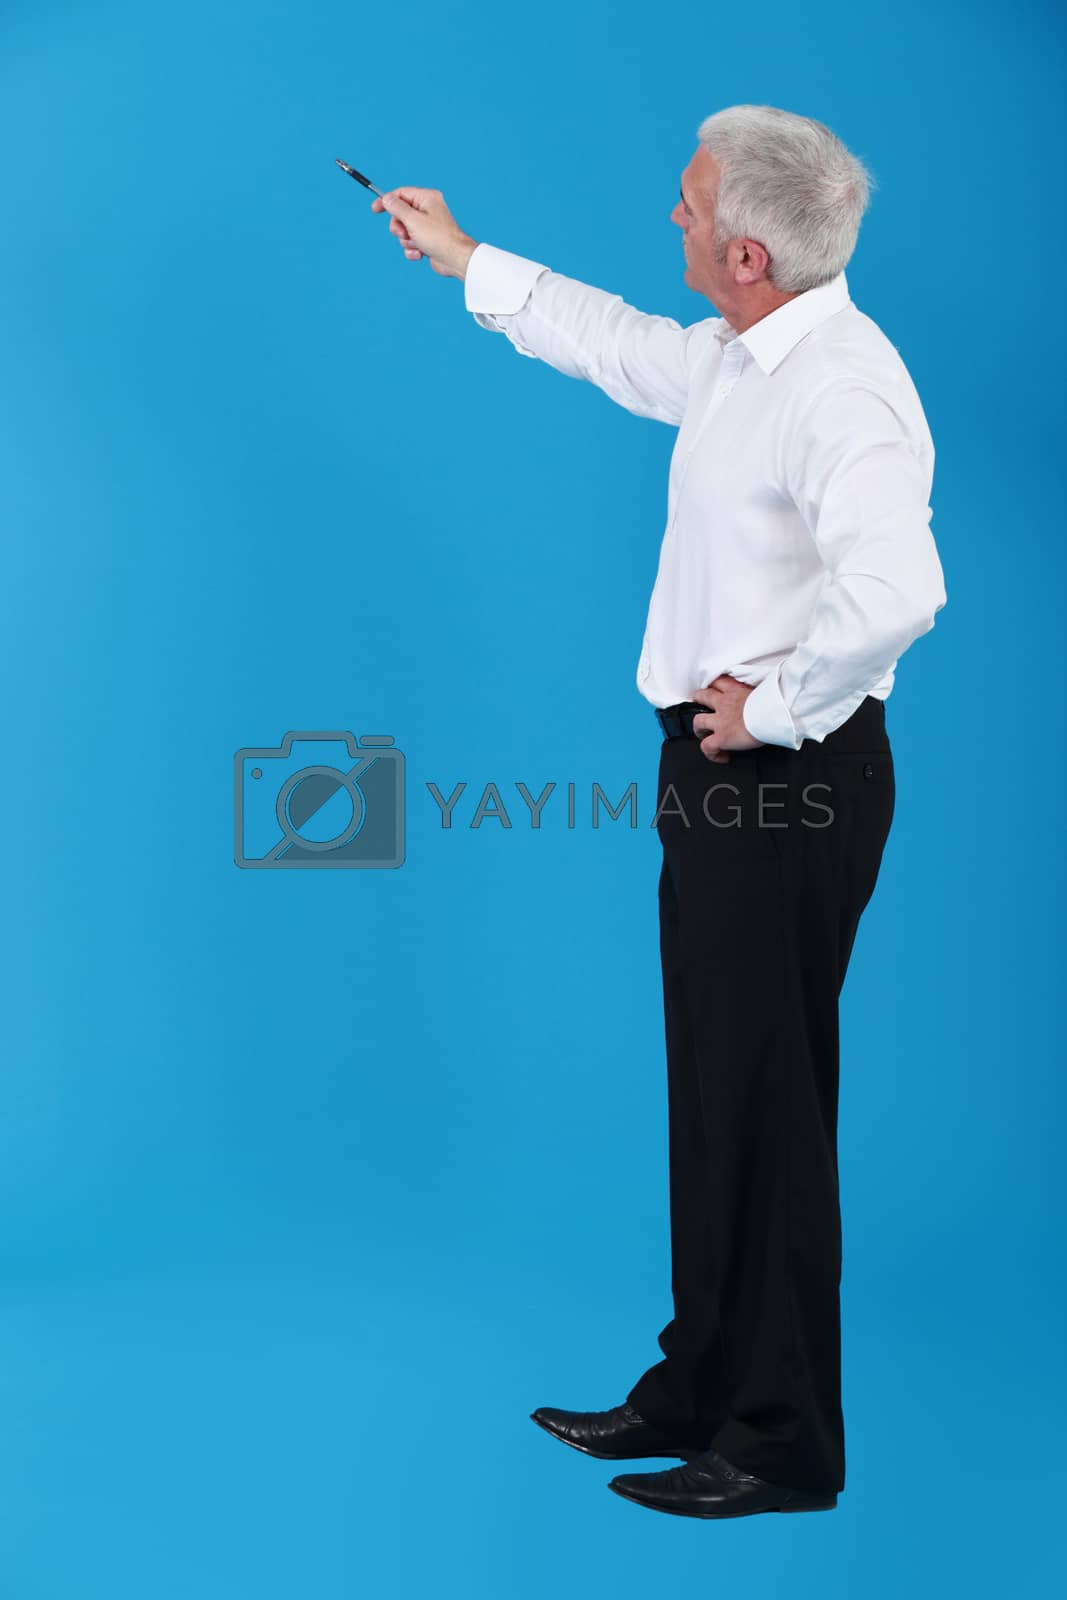 Royalty free image of Man pointing to an invisible object by phovoir